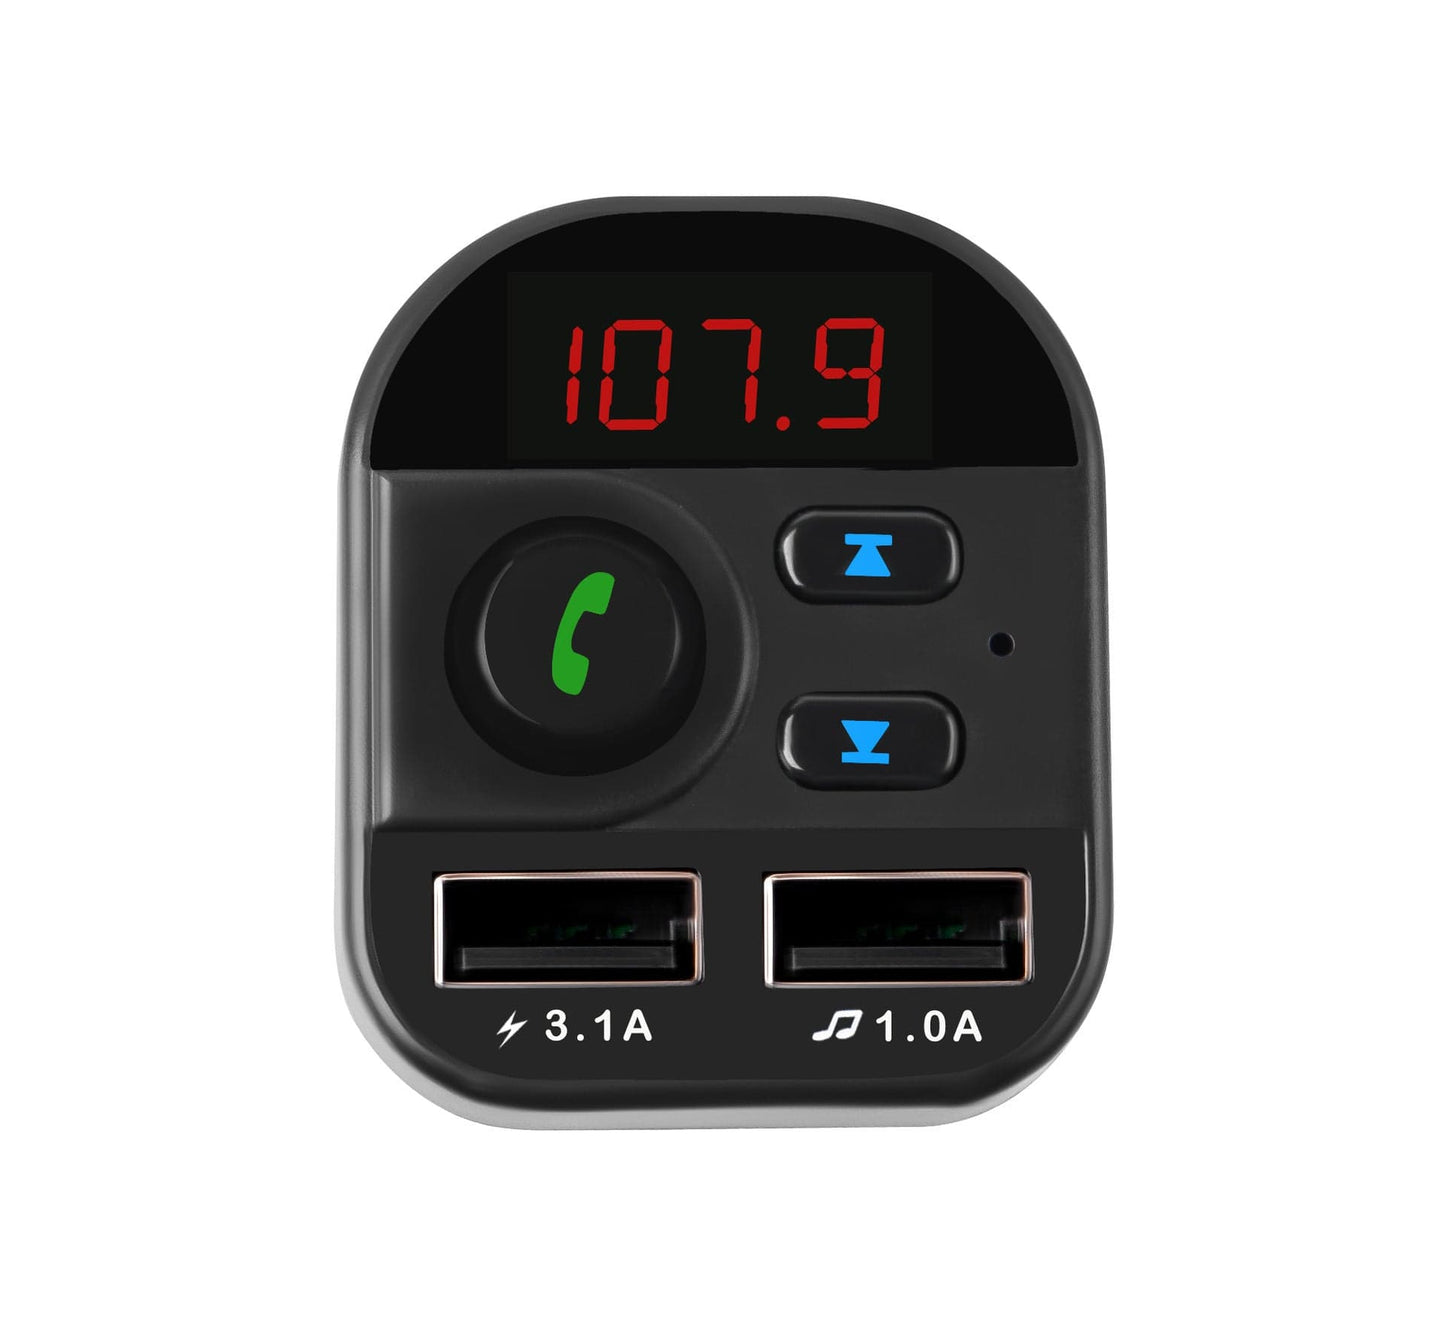 New 805E car MP3 car FM transmitter Bluetooth mobile phone card lossless audio faster charge Double USB